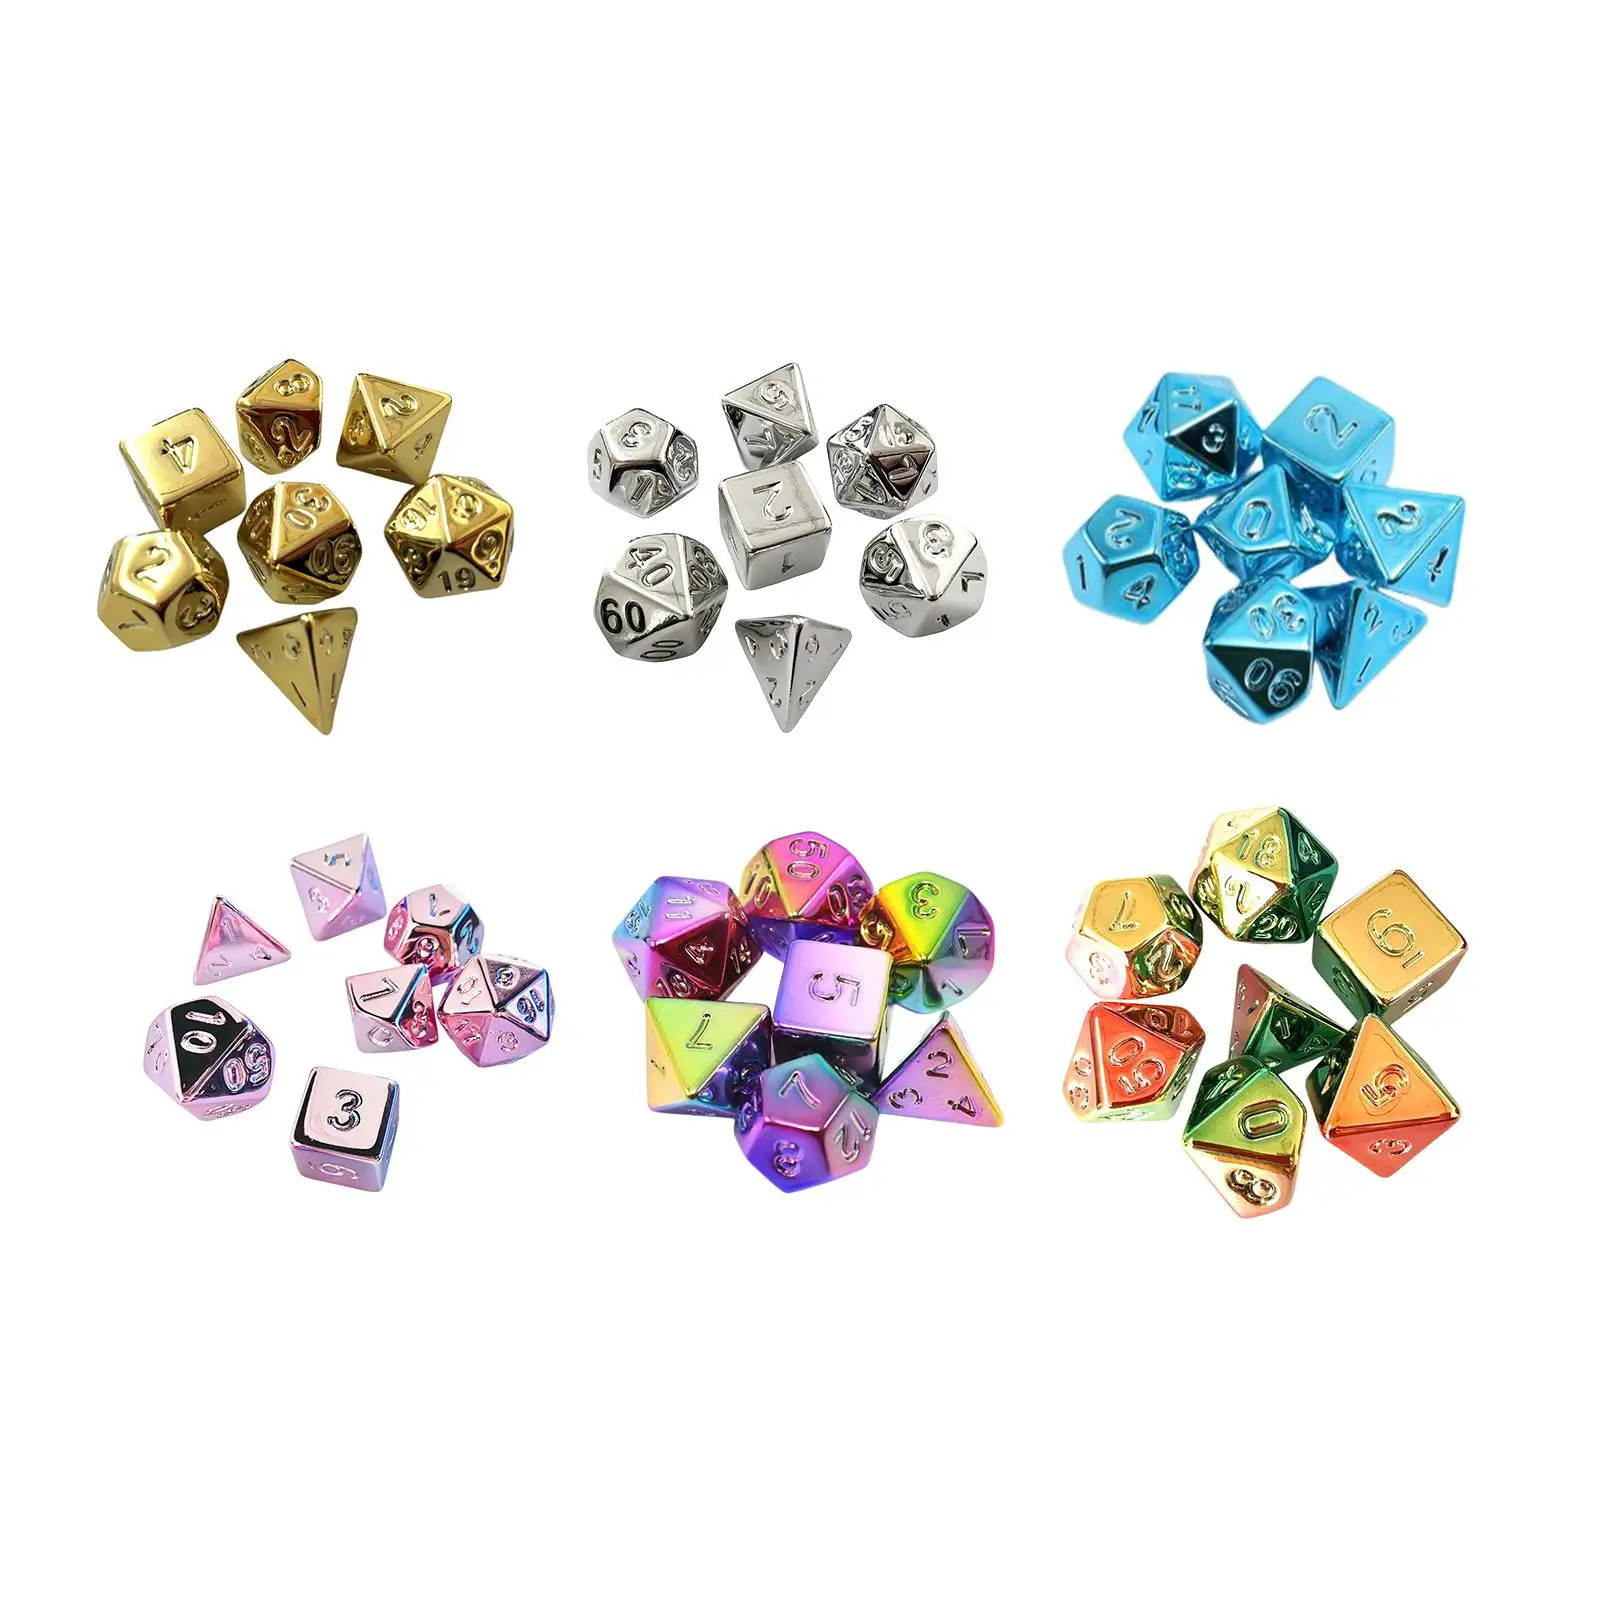 7 Pieces Acrylic Dices D4-d20 Polyhedral Dices Set for Board Game Card Games